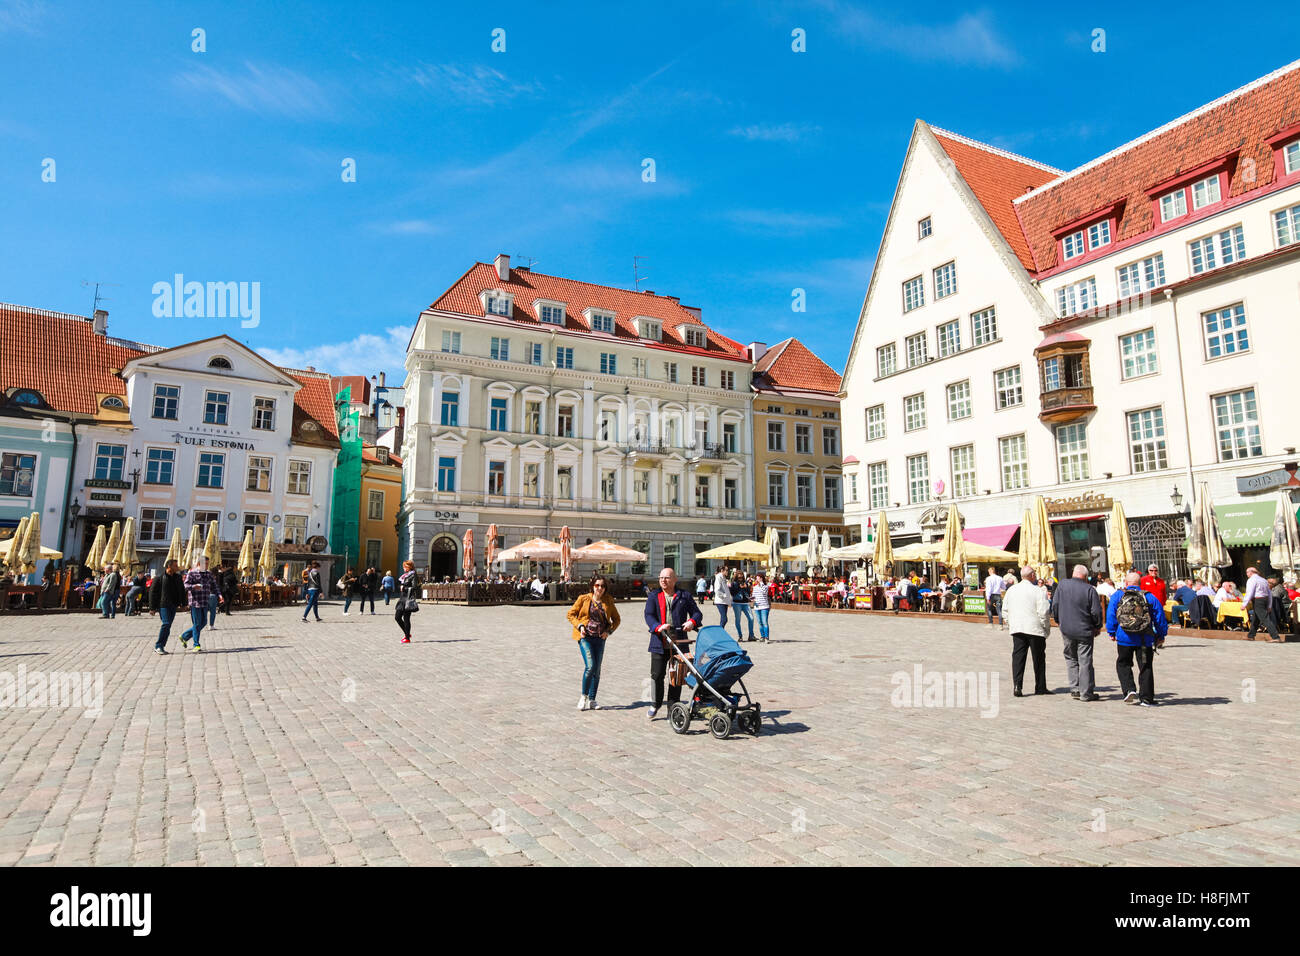 Tallinn, Estonia - May 2, 2016: Tourists and citizens walk on Town Hall square in old Tallinn, bright spring sunny day Stock Photo